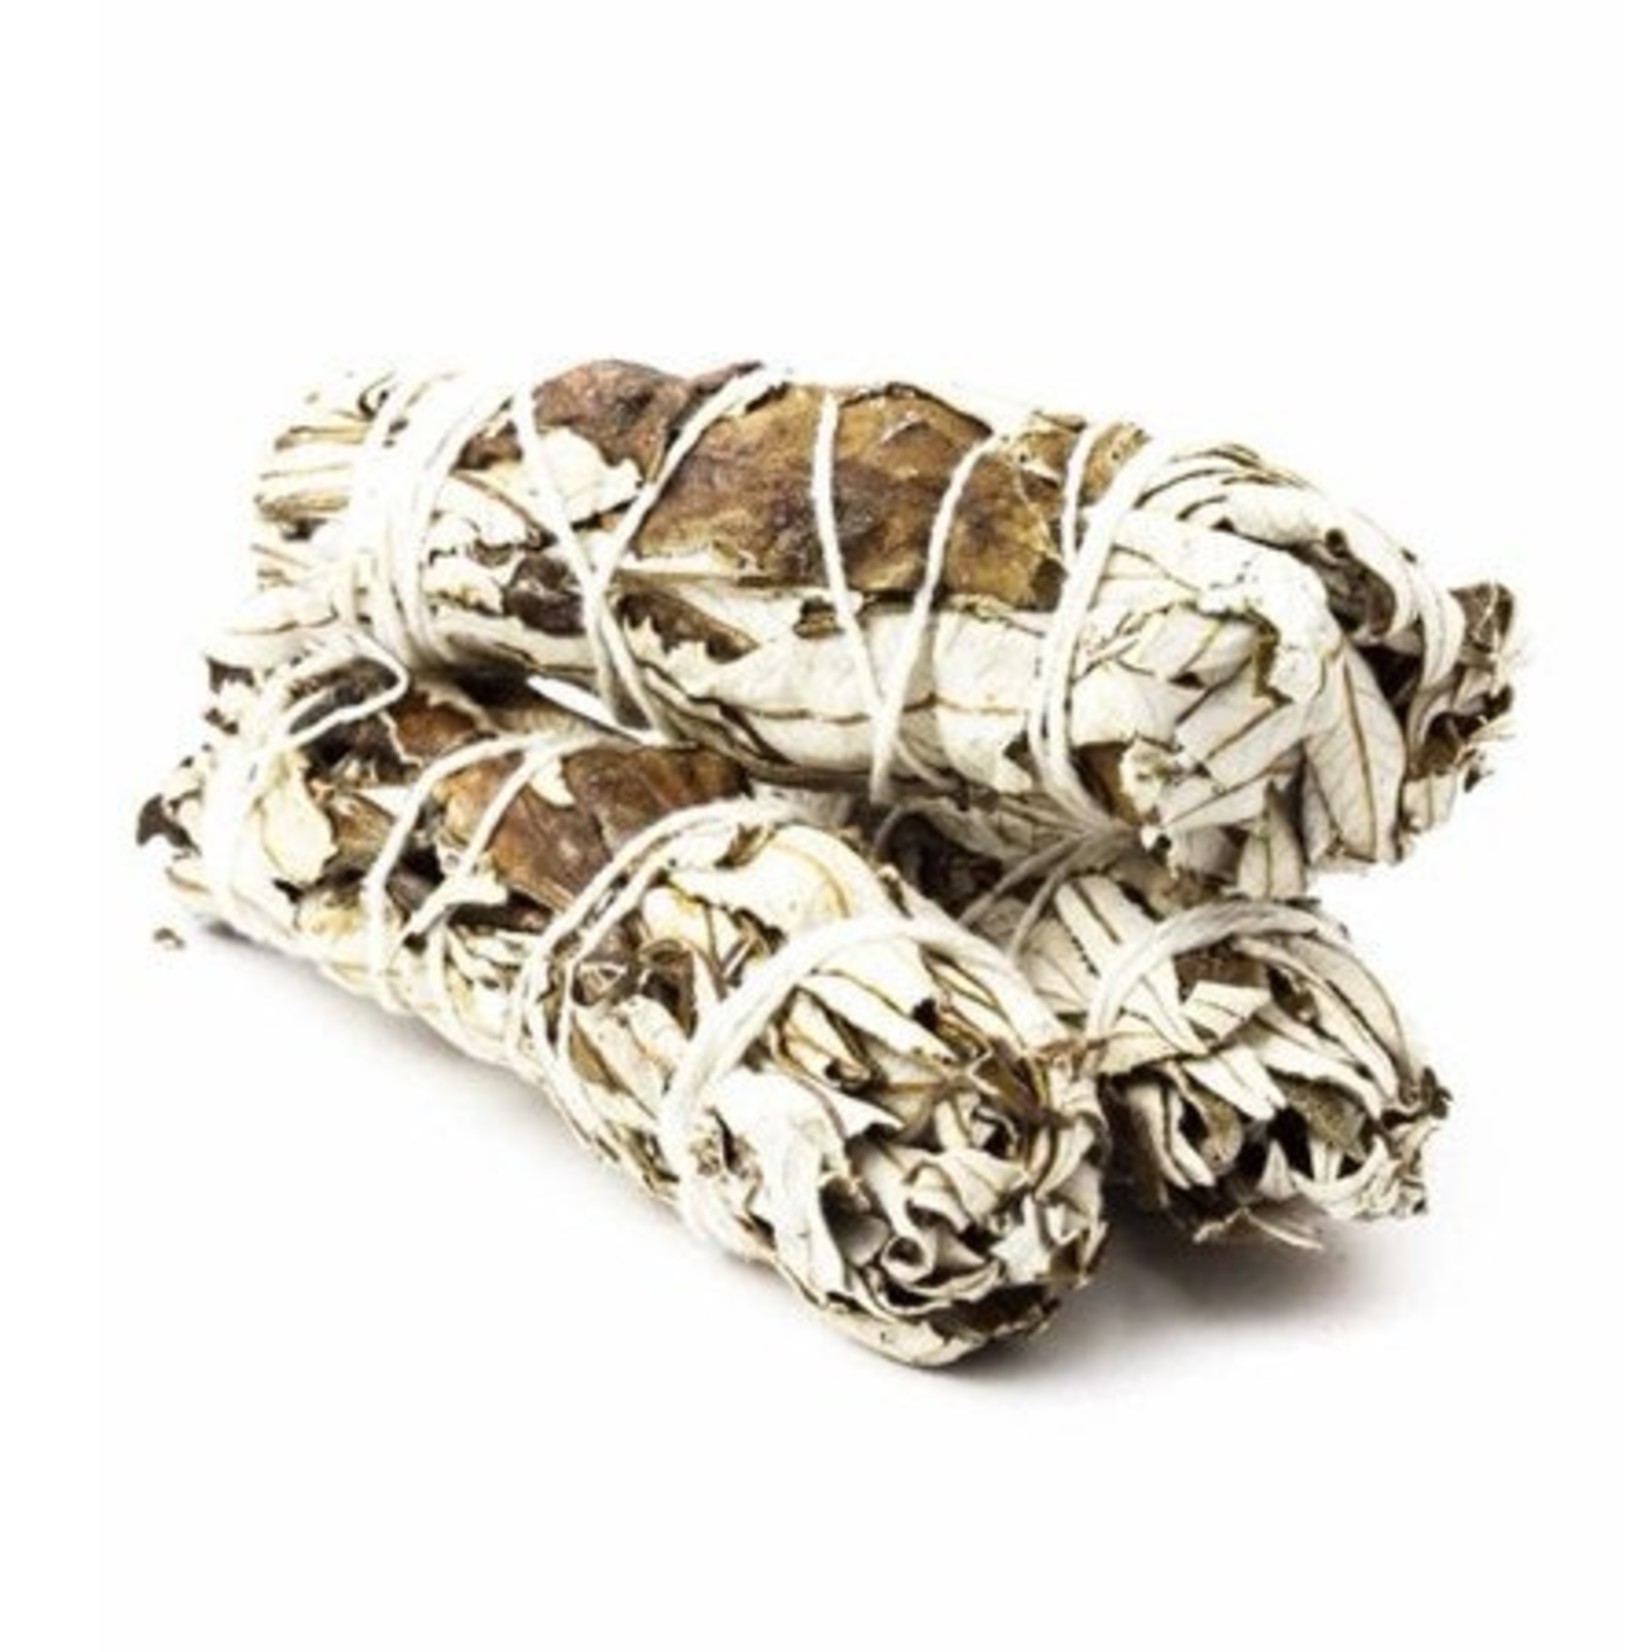 Yerba Santa Smudge Stick - Holy Herb for Protection & Fragrance